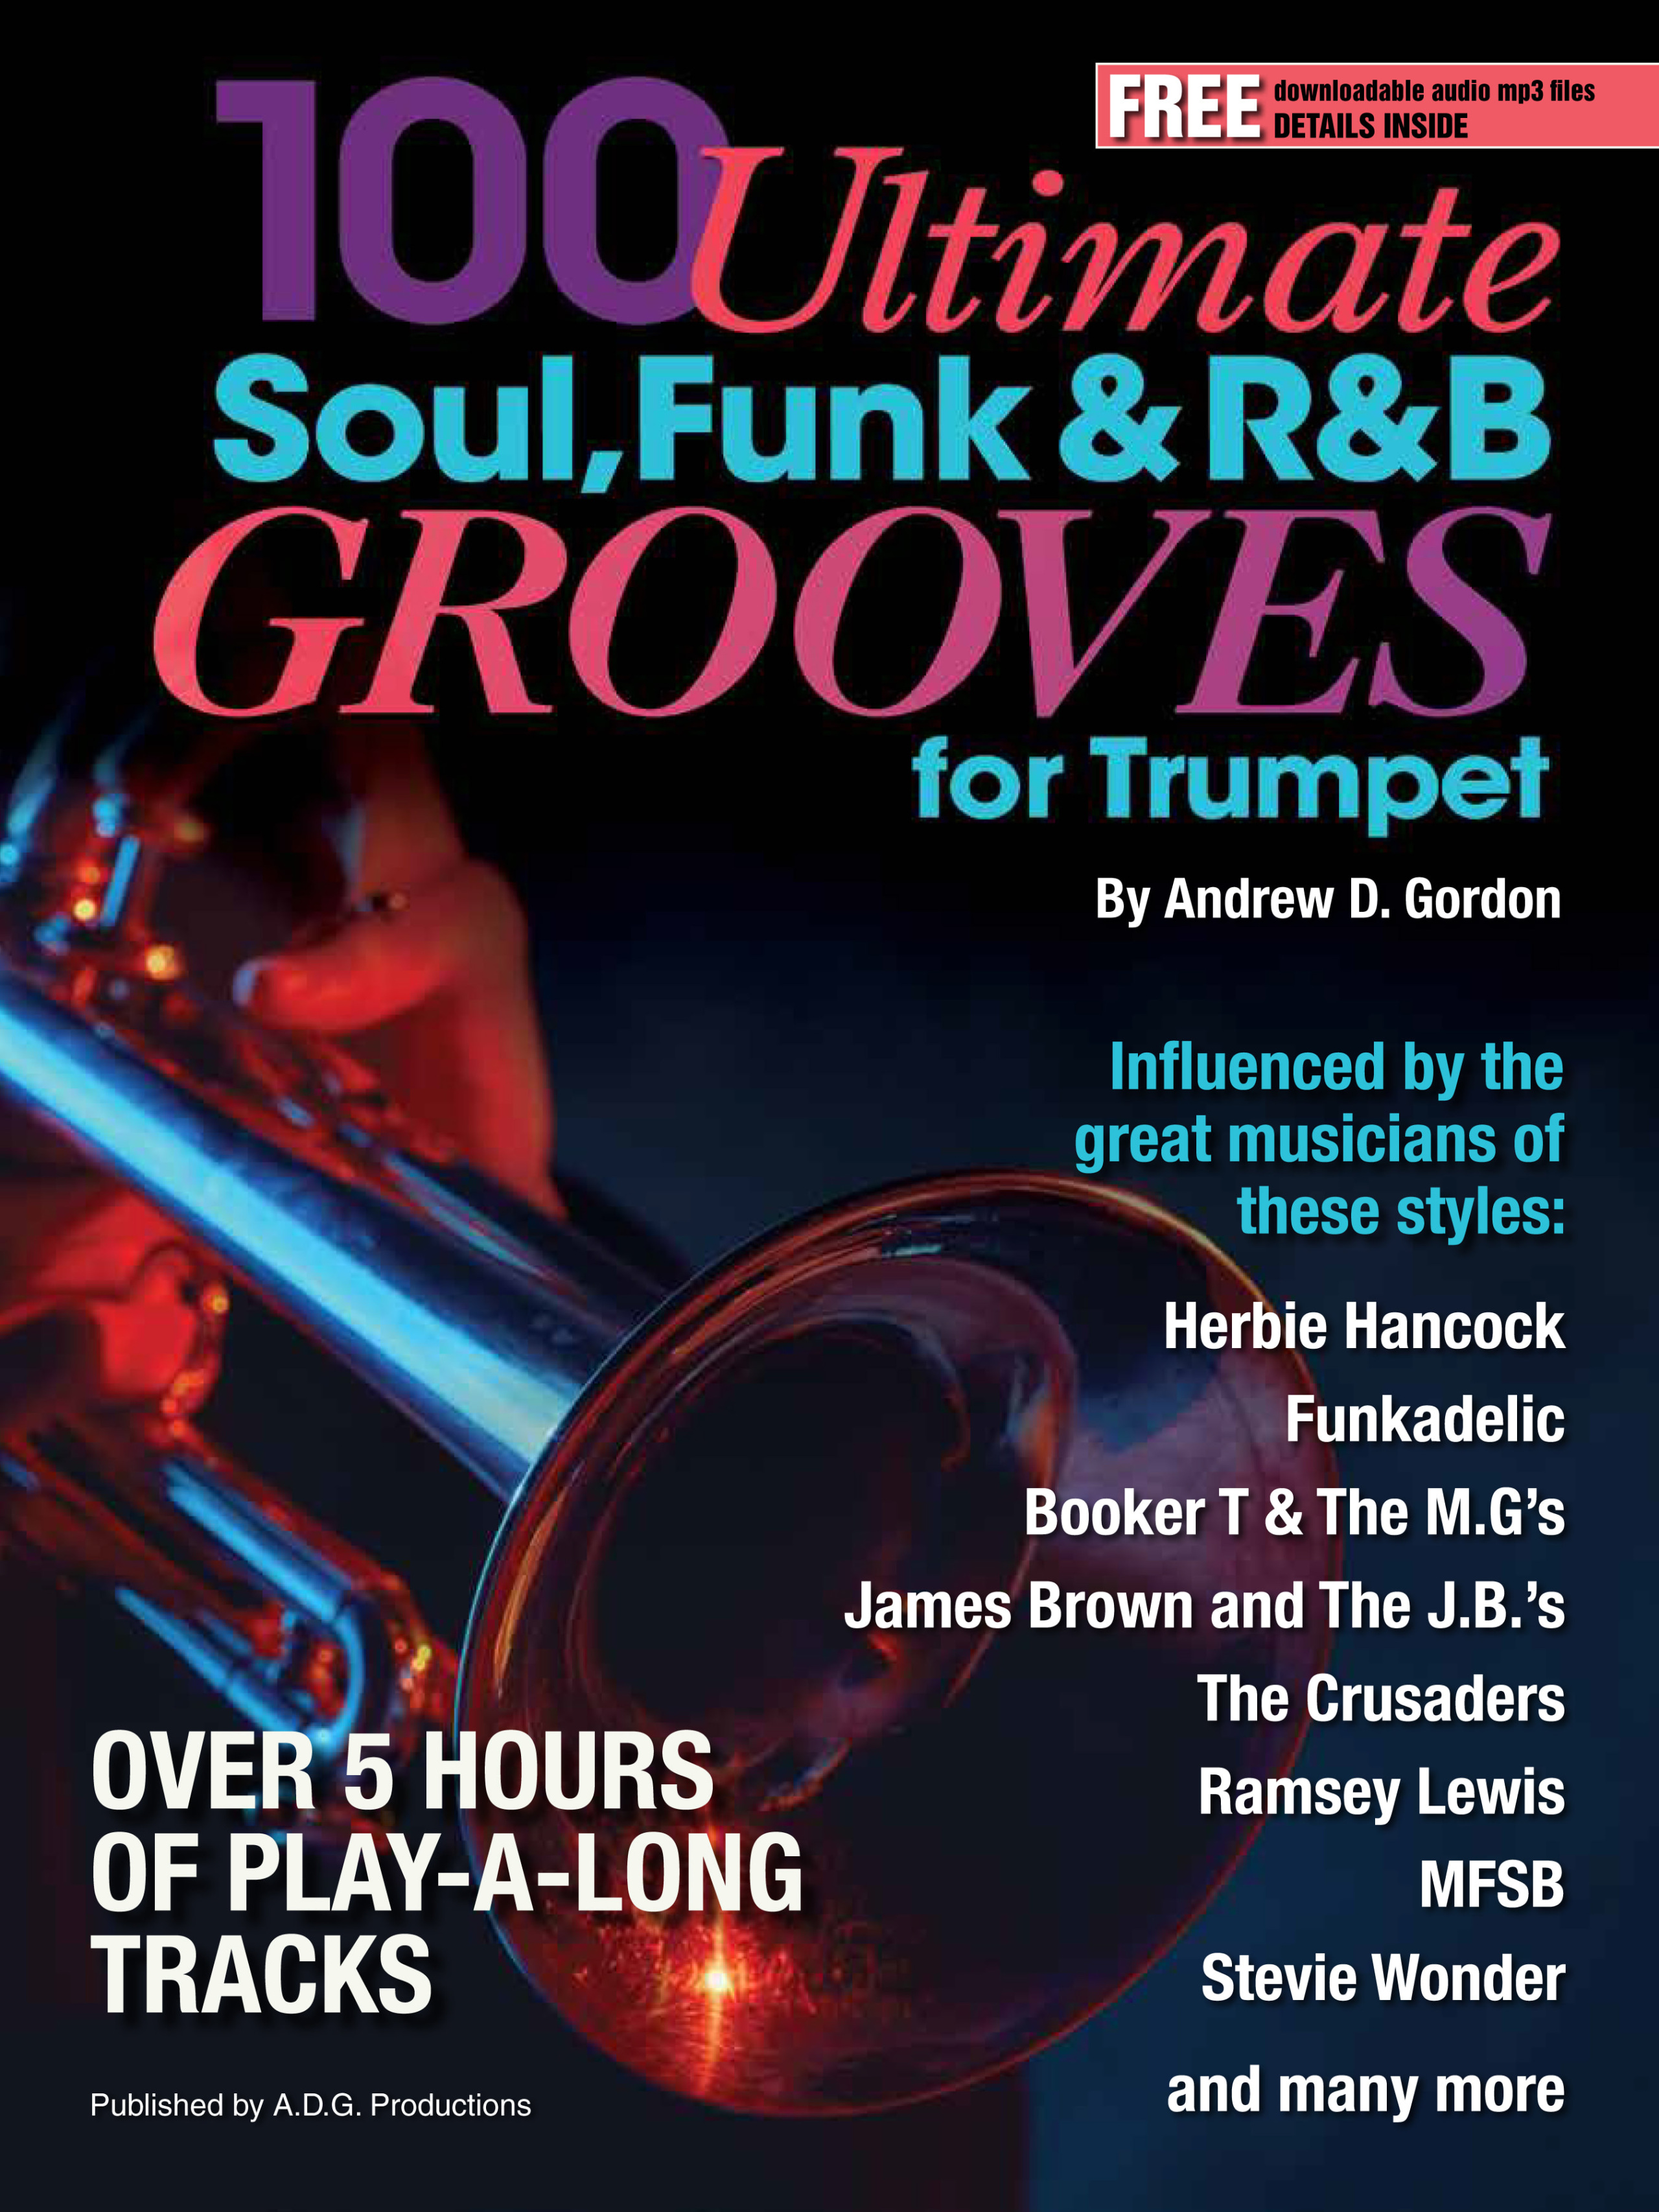 100 Ultimate Soul, Funk and R&B Grooves for Trumpet PDF/mp3 files